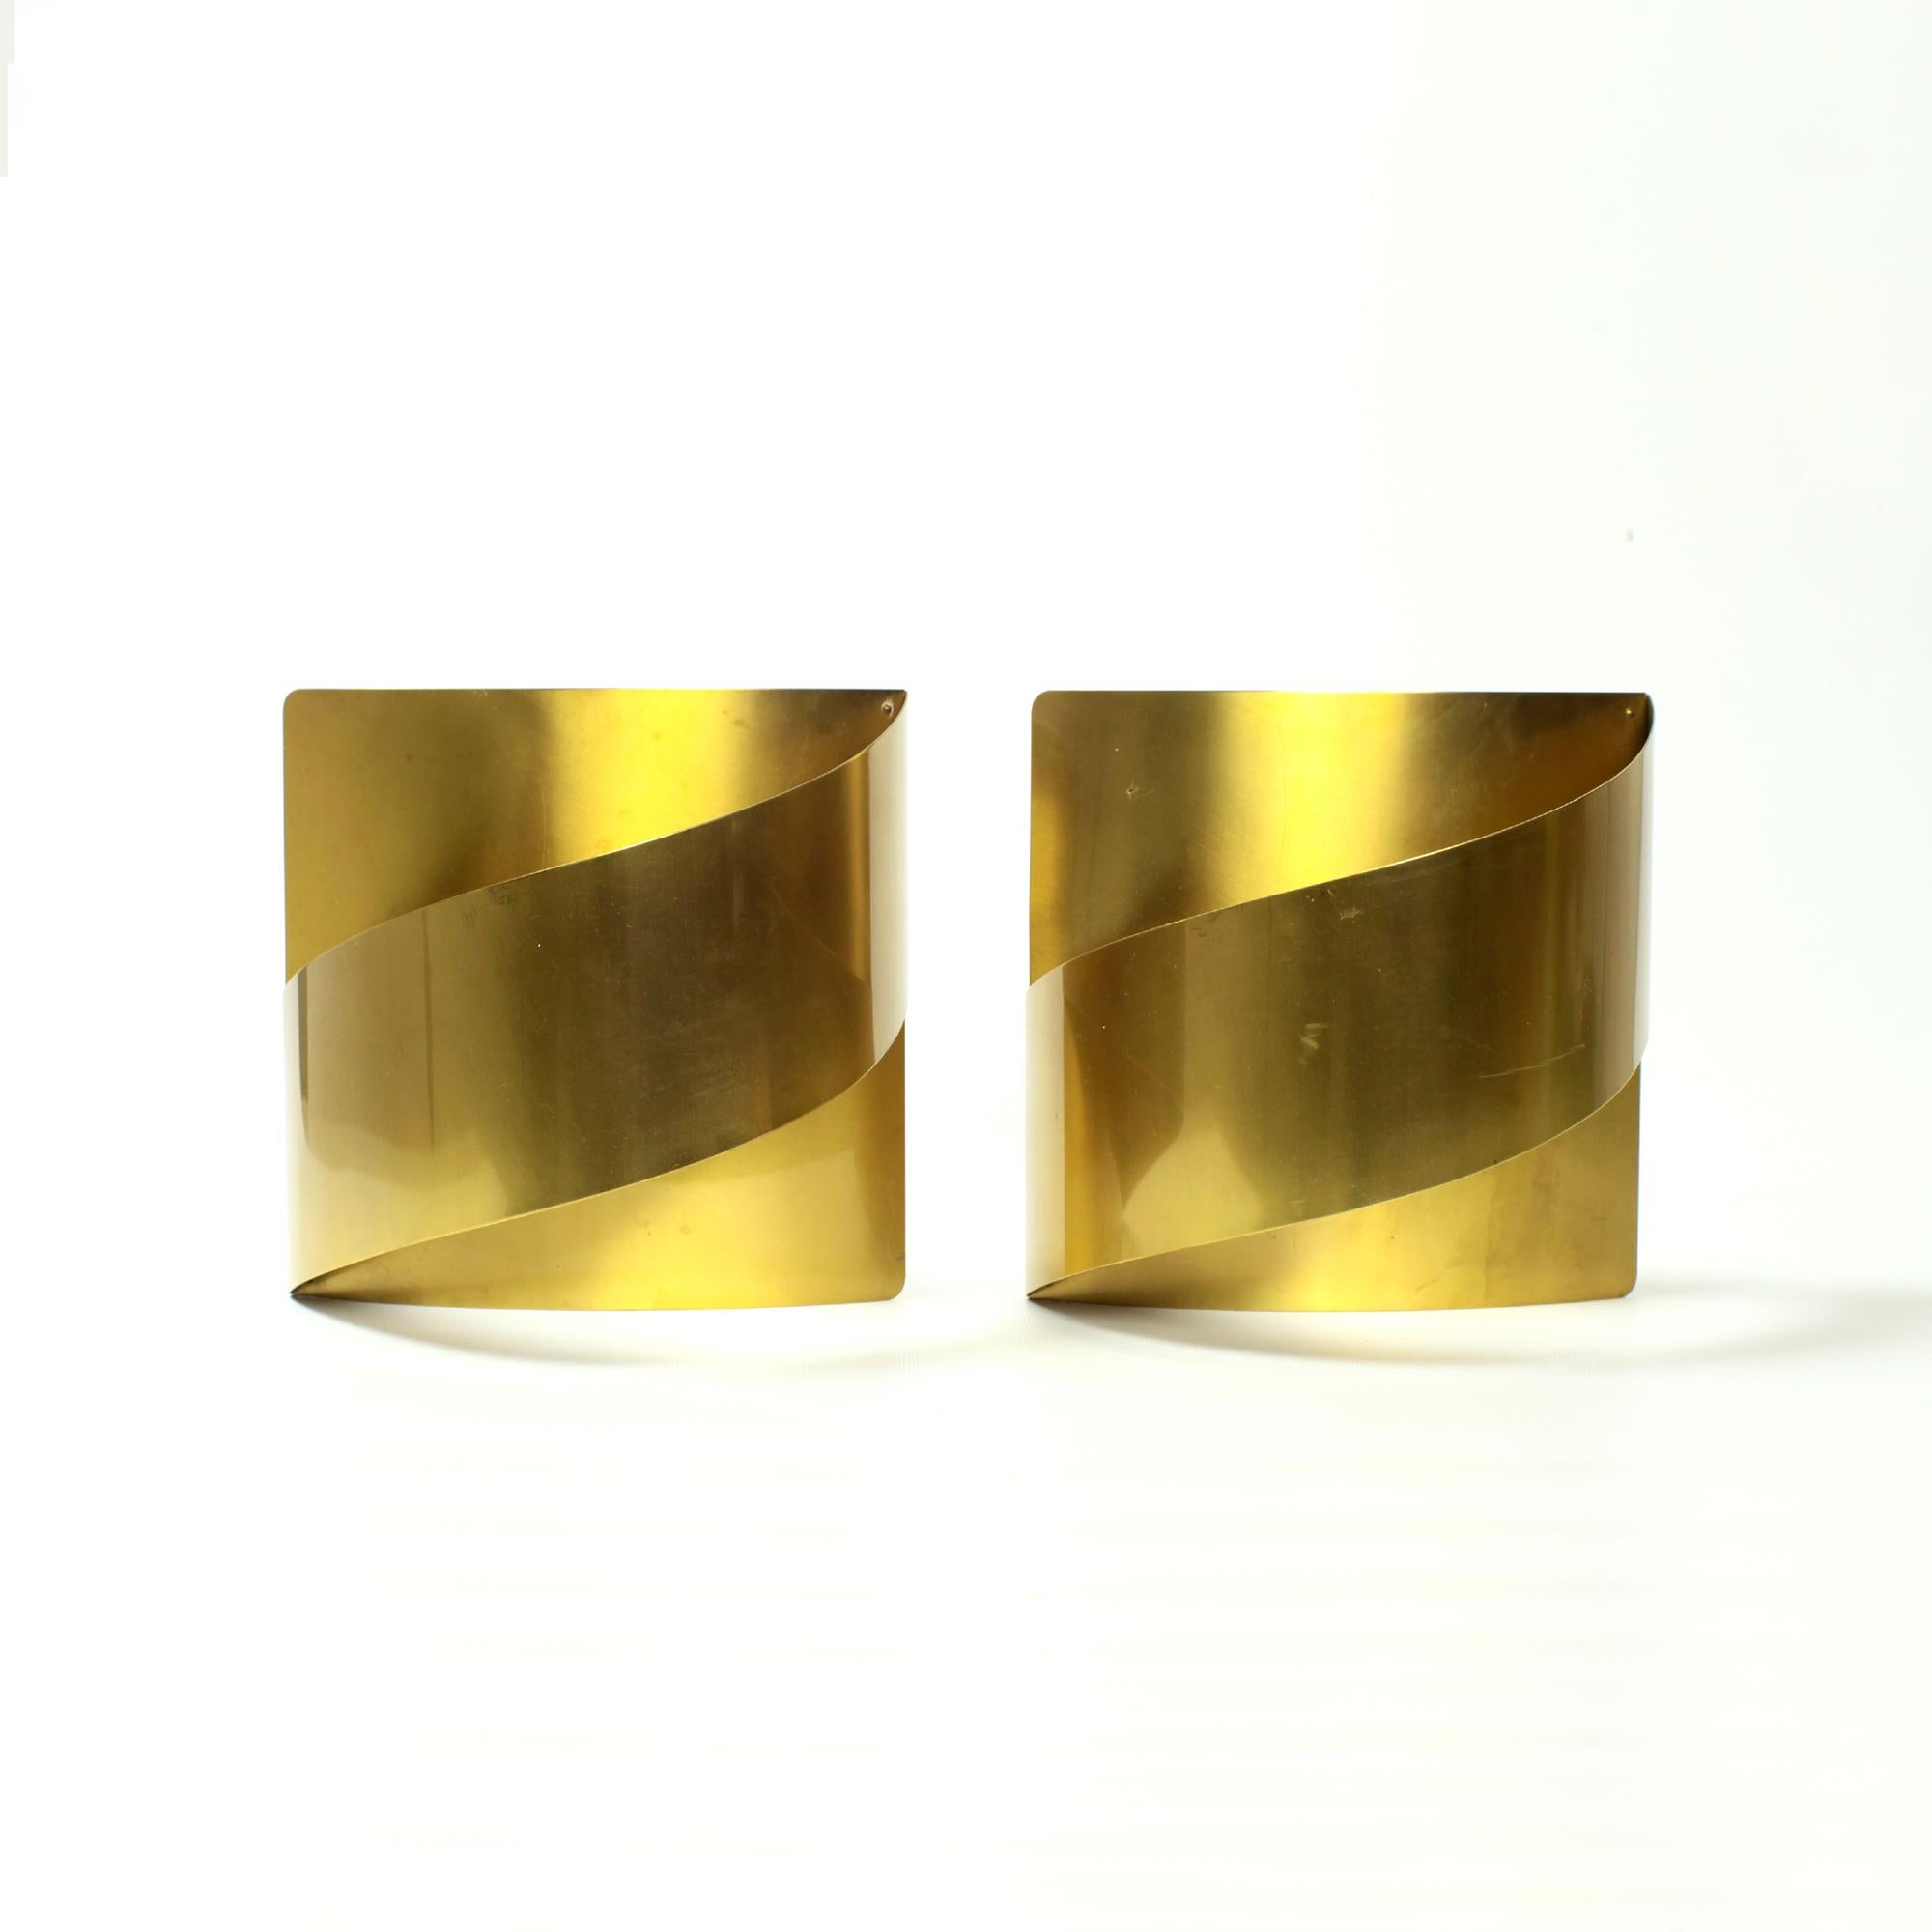 Scandinavian Modern 1960s Pair of Brass Wall-Mounted Lamps by Peter Celsing For Sale